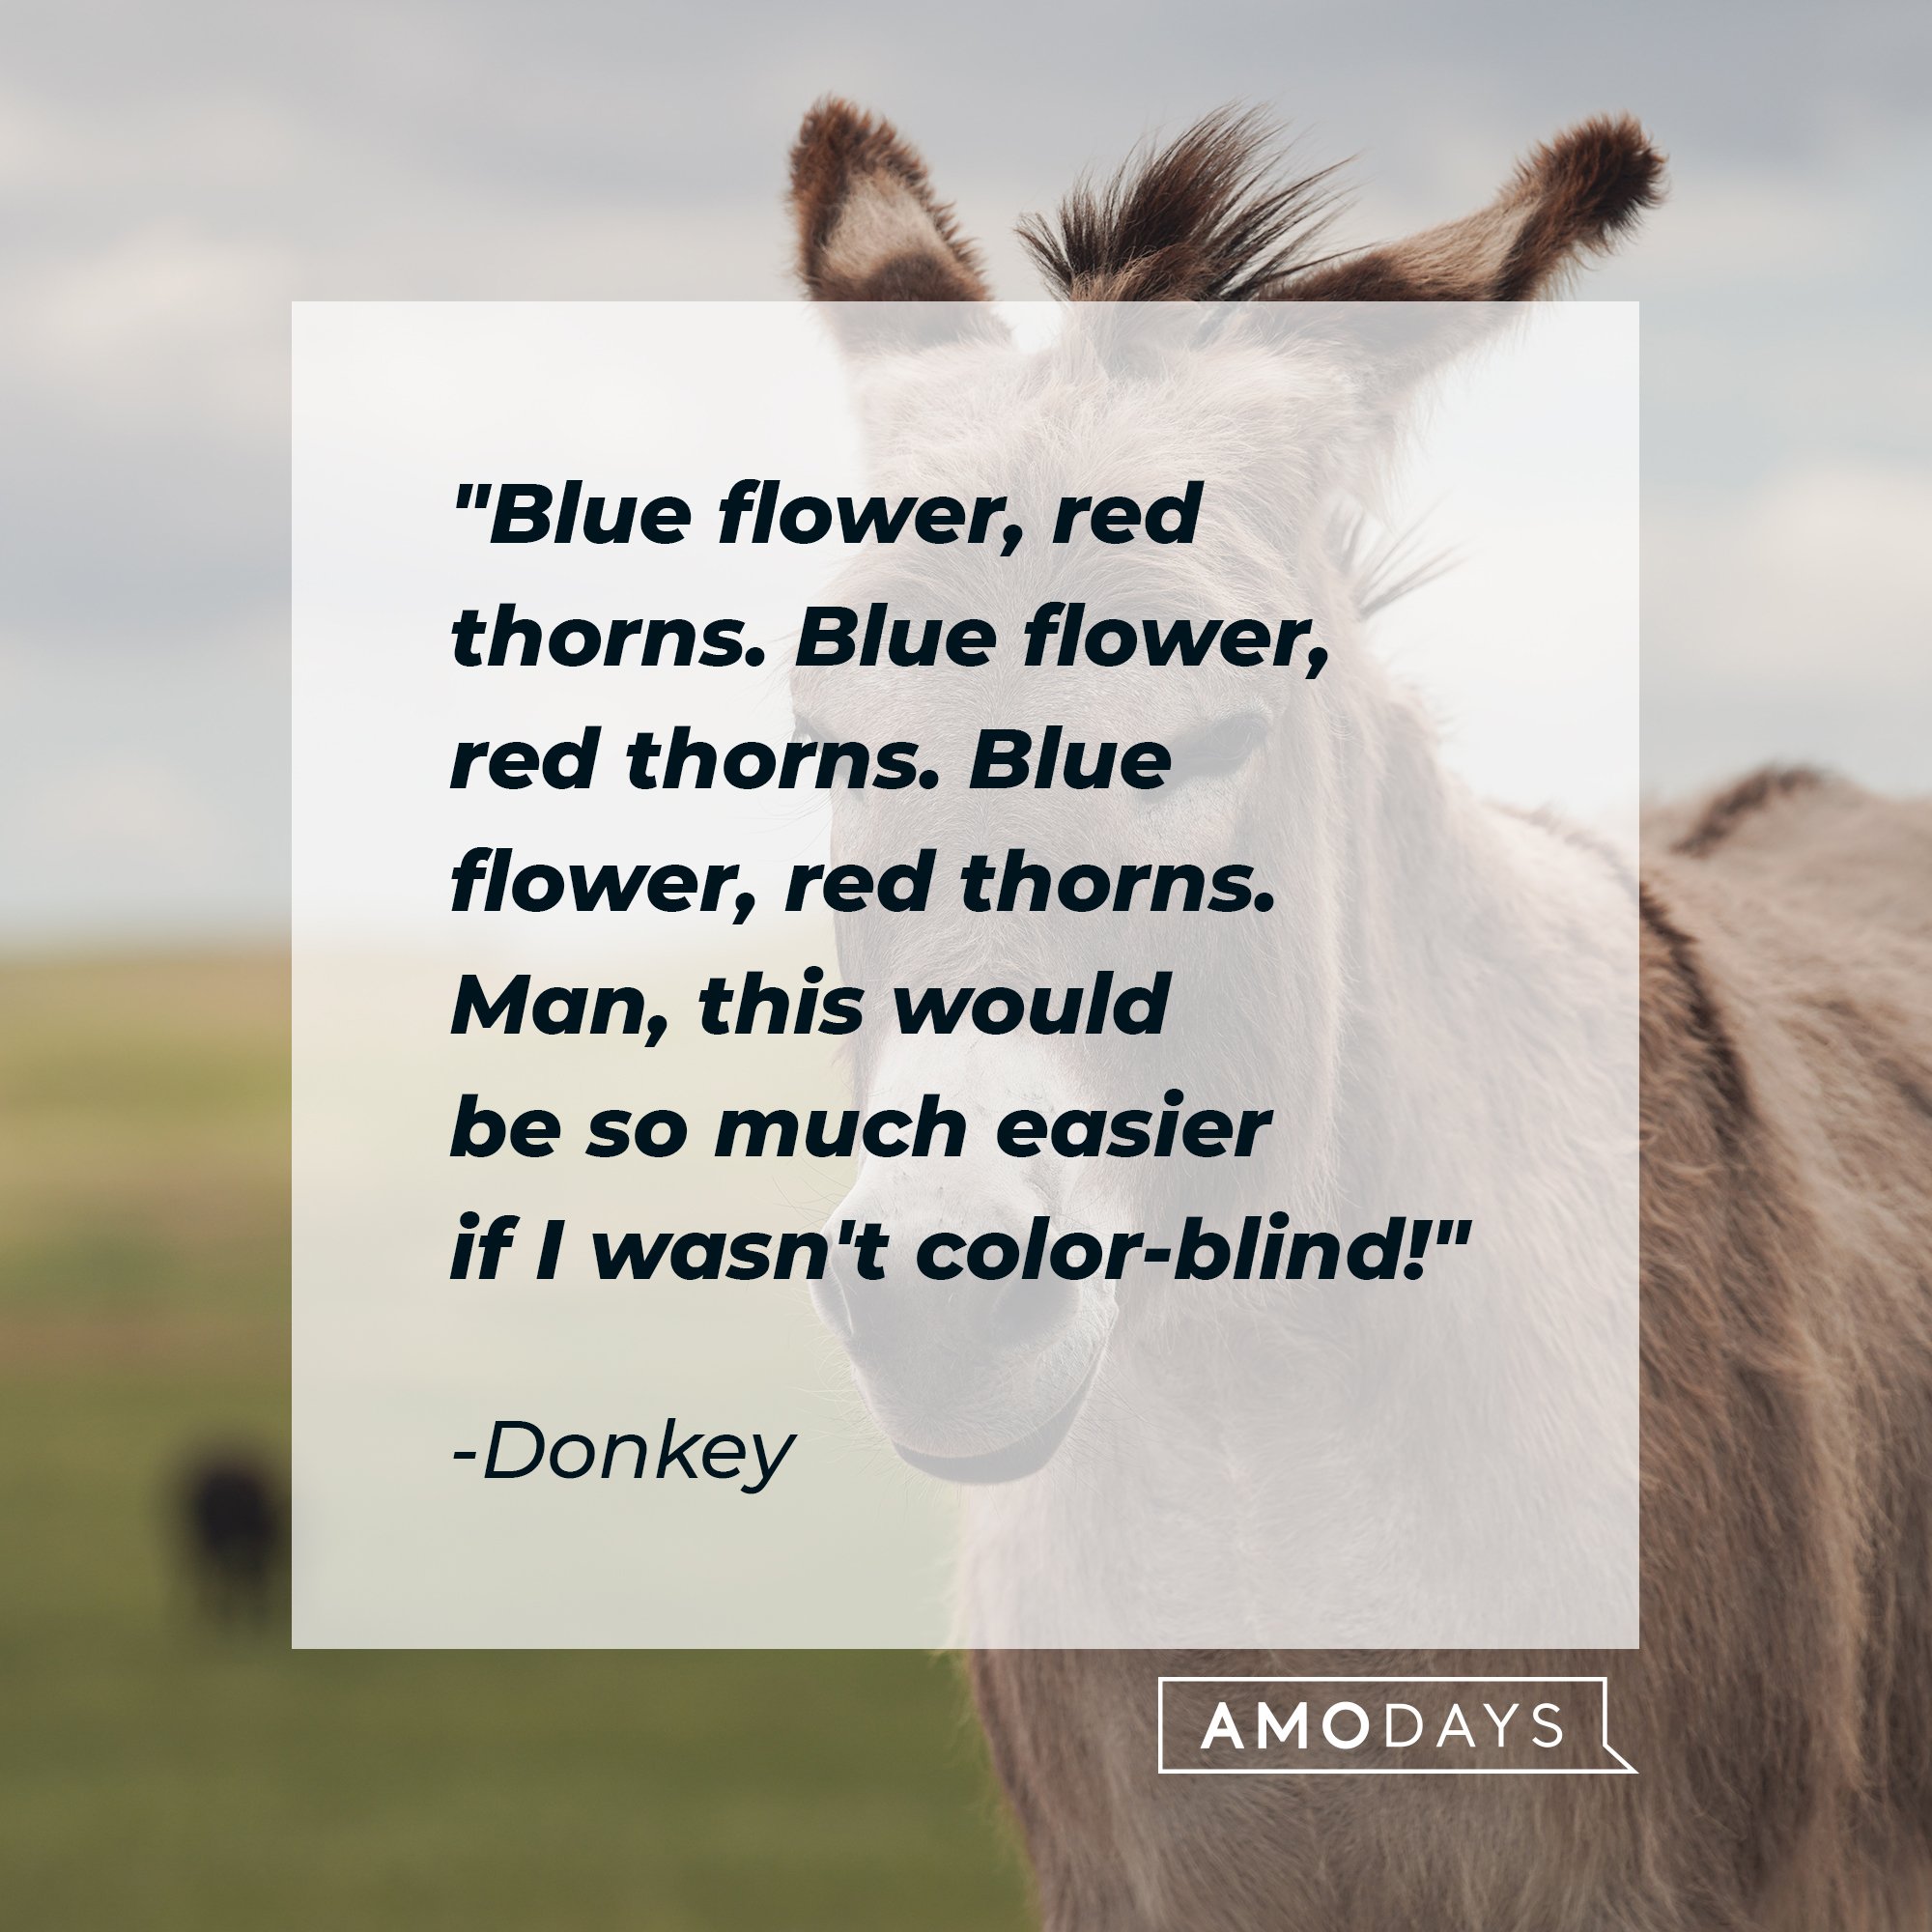  Donkey's quote: "Blue flower, red thorns. Blue flower, red thorns. Blue flower, red thorns. Man, this would be so much easier if I wasn't color-blind!" | Image: AmoDays